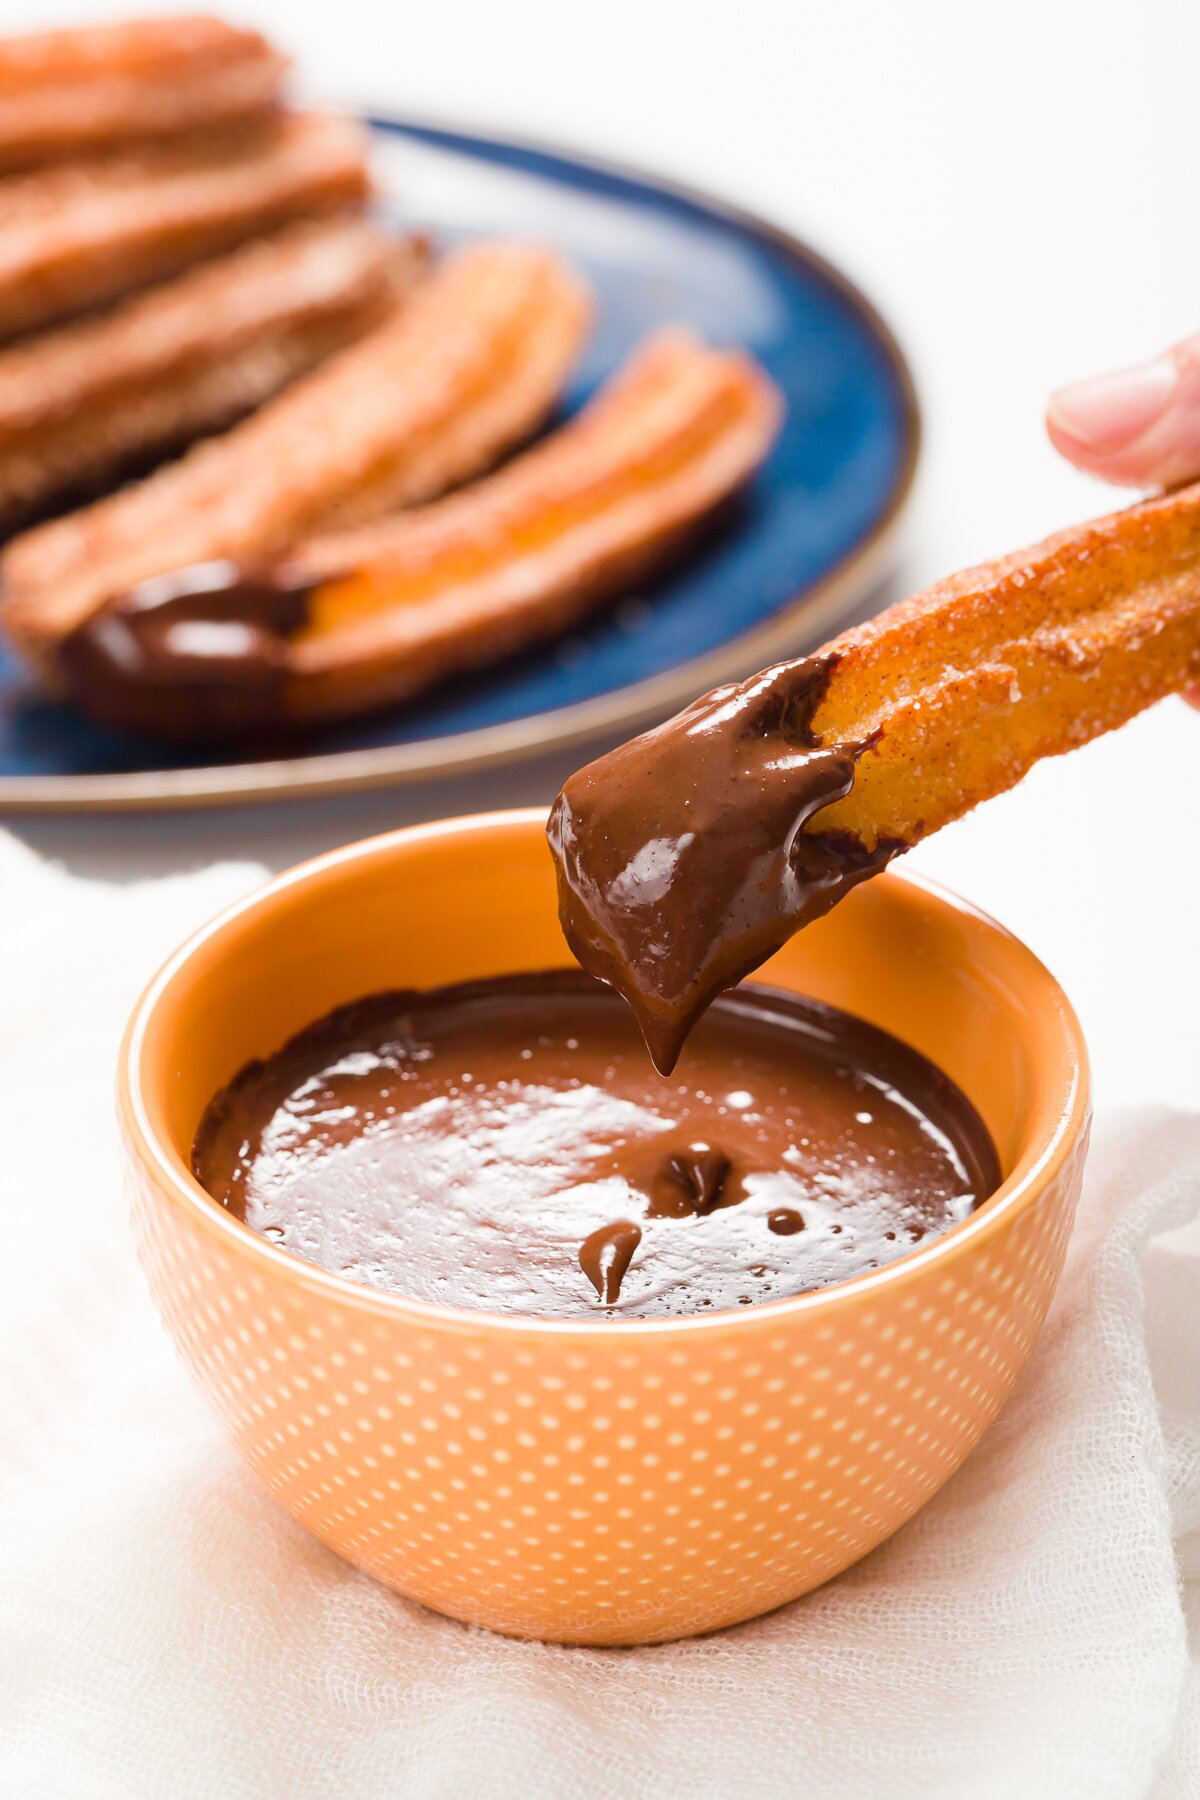 Dipping a churro into Mexican Chocolate Sauce